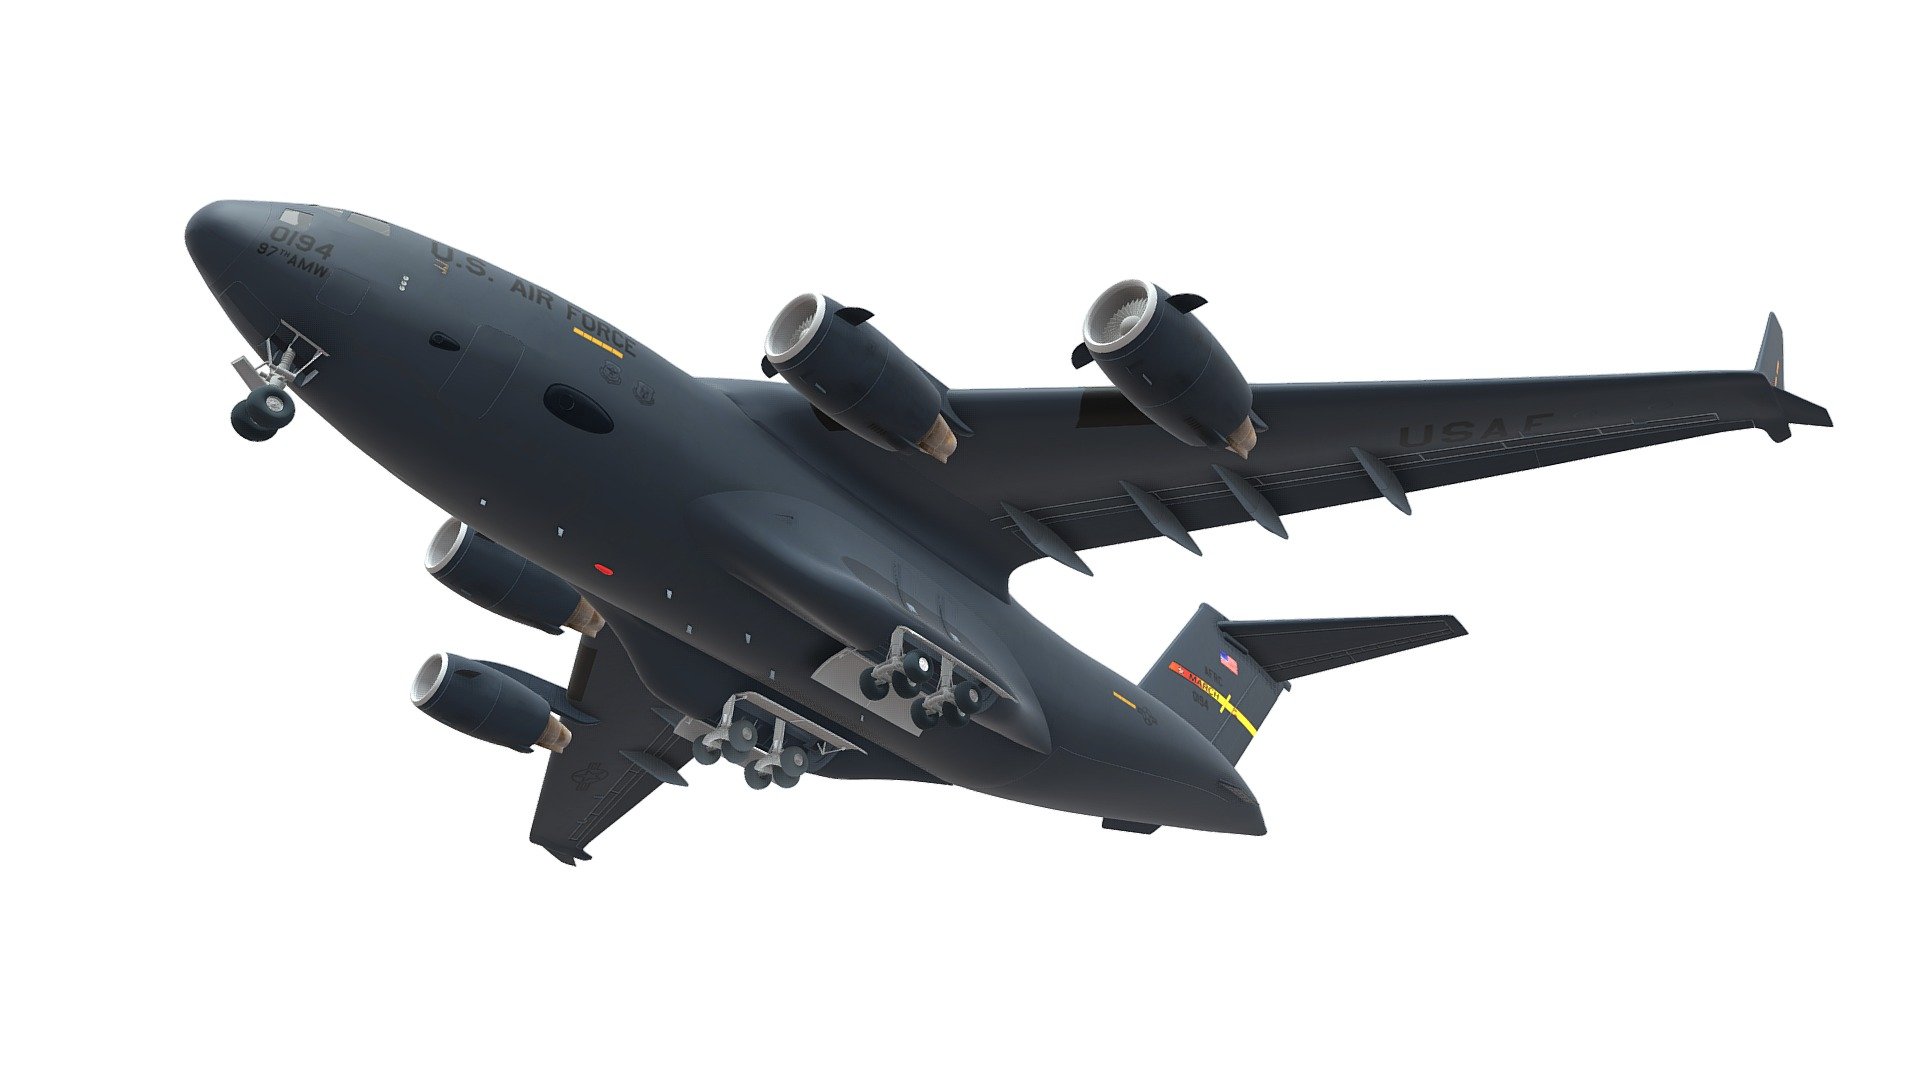 Highly detailed 3d model of C-17 Globemaster III, the large military transport aircraft.

Included Formats:

3ds

Lightwave

OBJ

Softimage

3ds Max

Maya - C-17 Globemaster 3D Model - Buy Royalty Free 3D model by 3DHorse 3d model